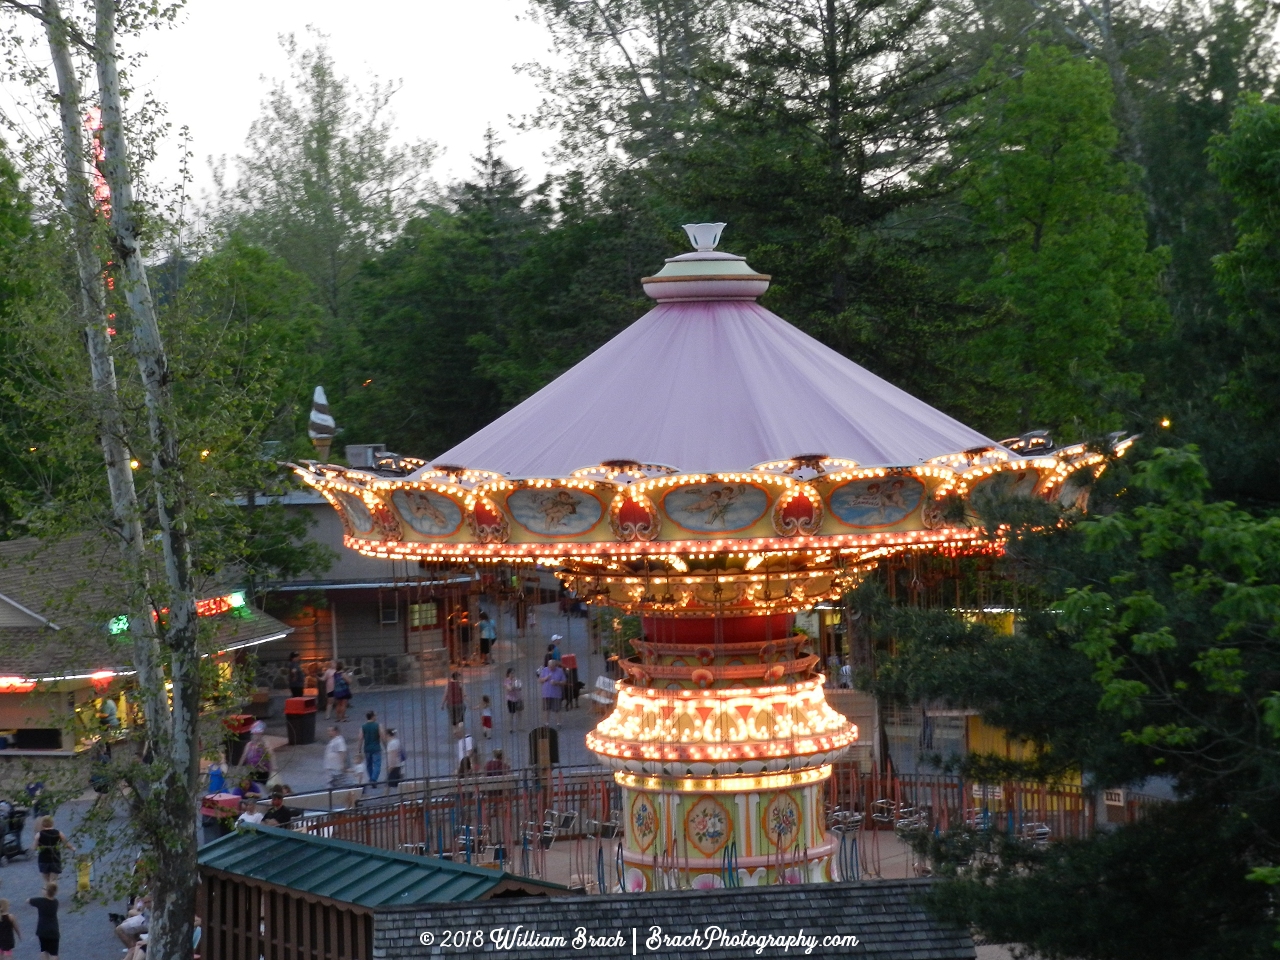 Knoebels Wave Swinger sits dormant for the 2018 season, but it's all lit up at night.